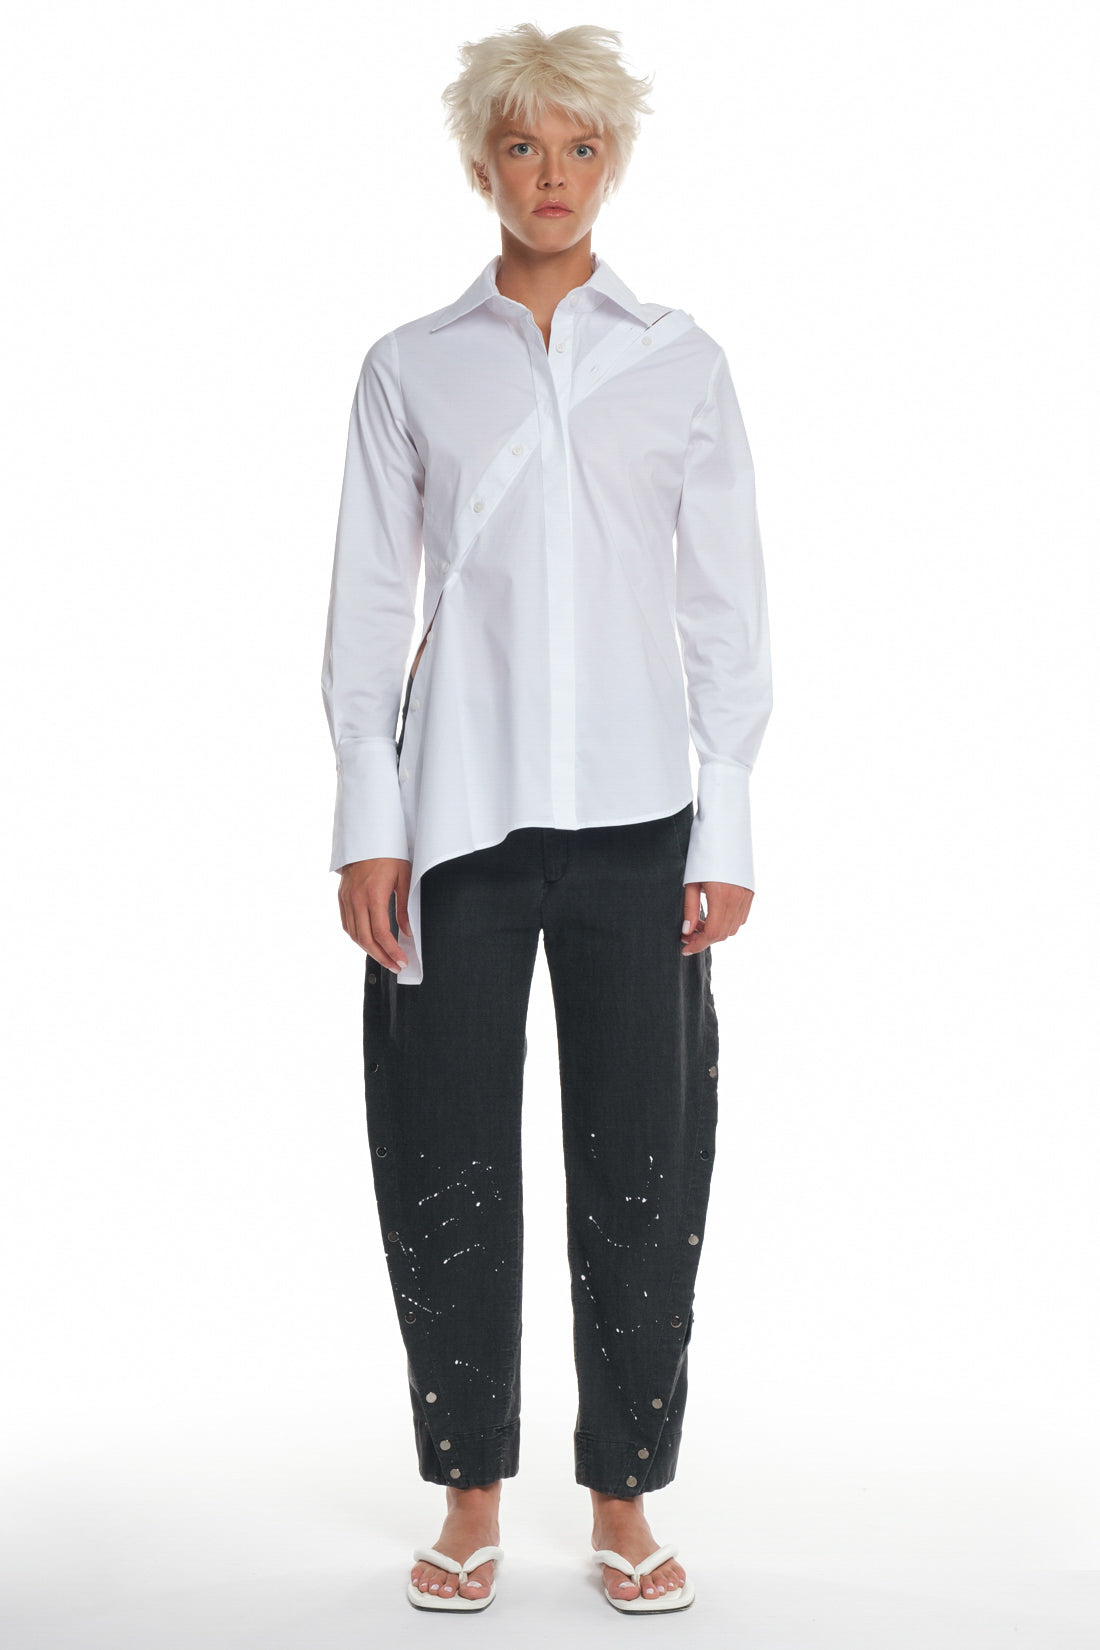 POPLIN COTTON SHIRT WITH DIAGONAL CUTTING AND BUTTONING, OPEN SHOULDER, LONG SLEEVES, ASYMMETRICAL ON THE SIDE OF THE BUTTONING.